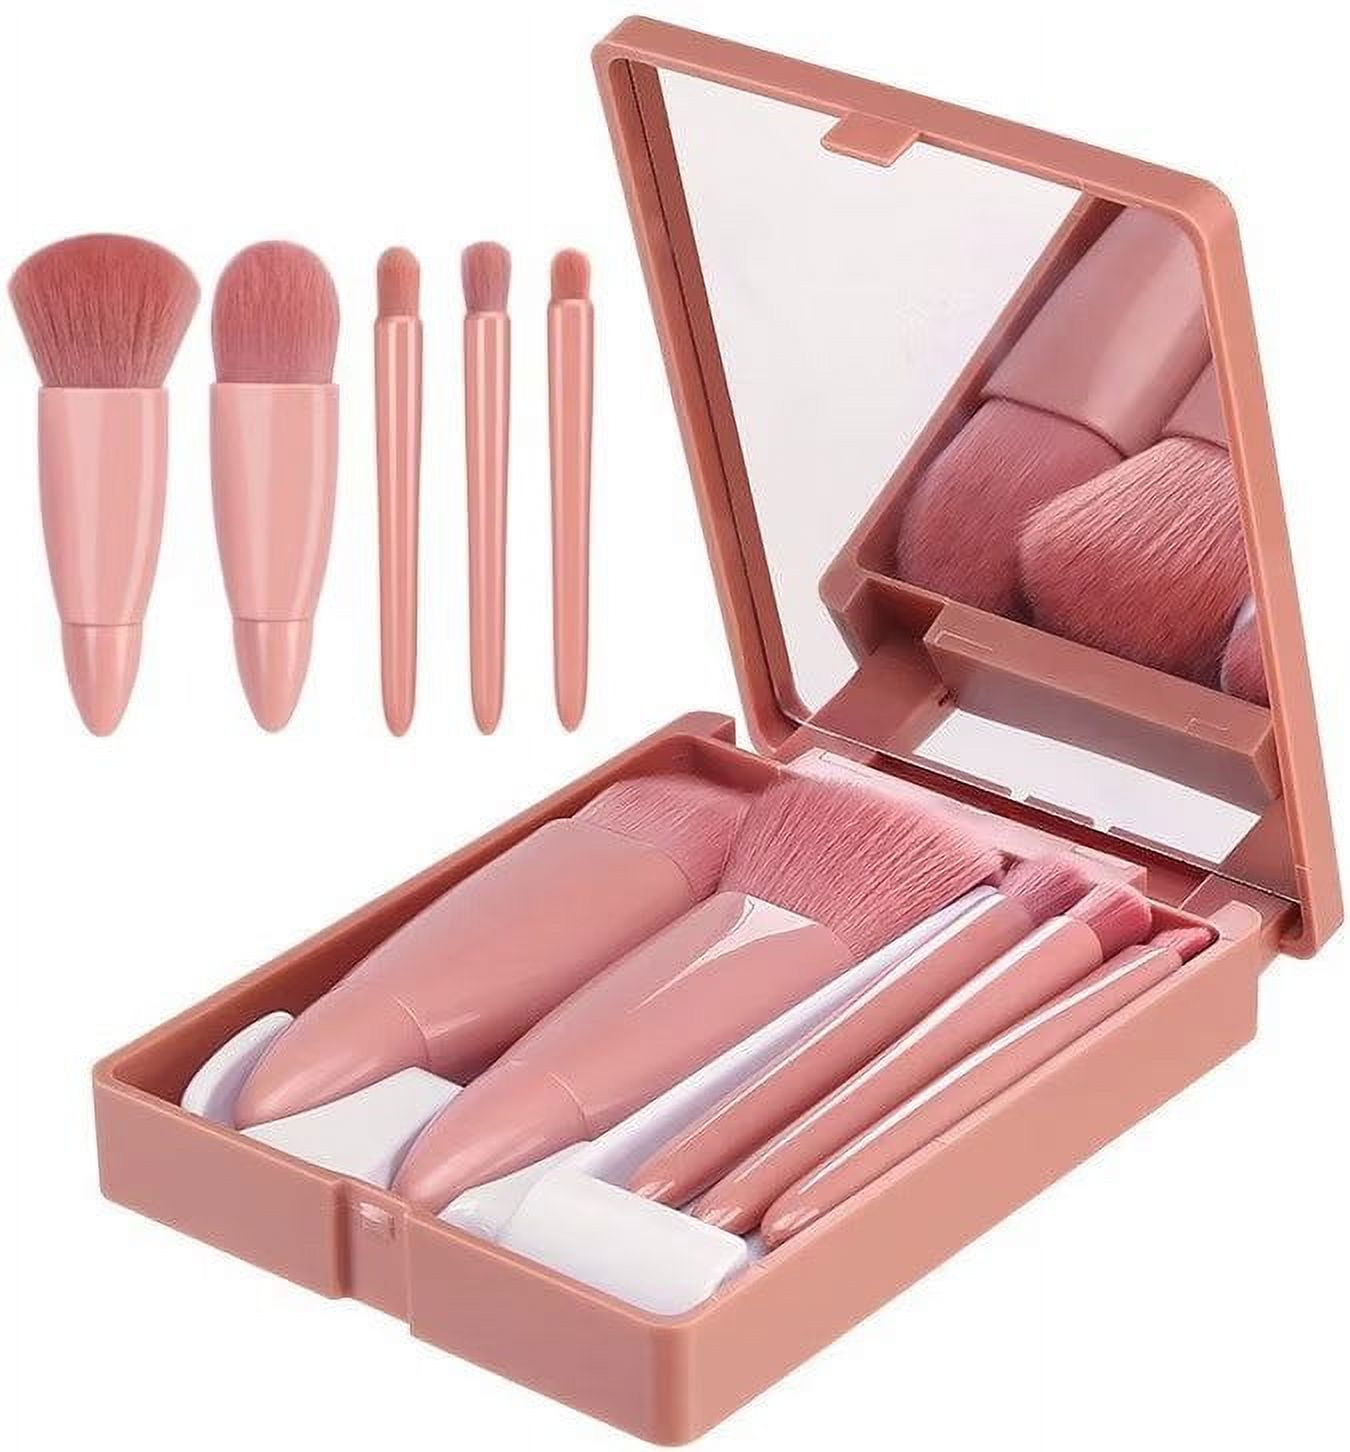 Impressions Vanity 6-Pcs Makeup Brush Set with Hello Kitty Kawaii Icon and Aluminum Ferrule, Super Soft Makeup Brushes (Pink)